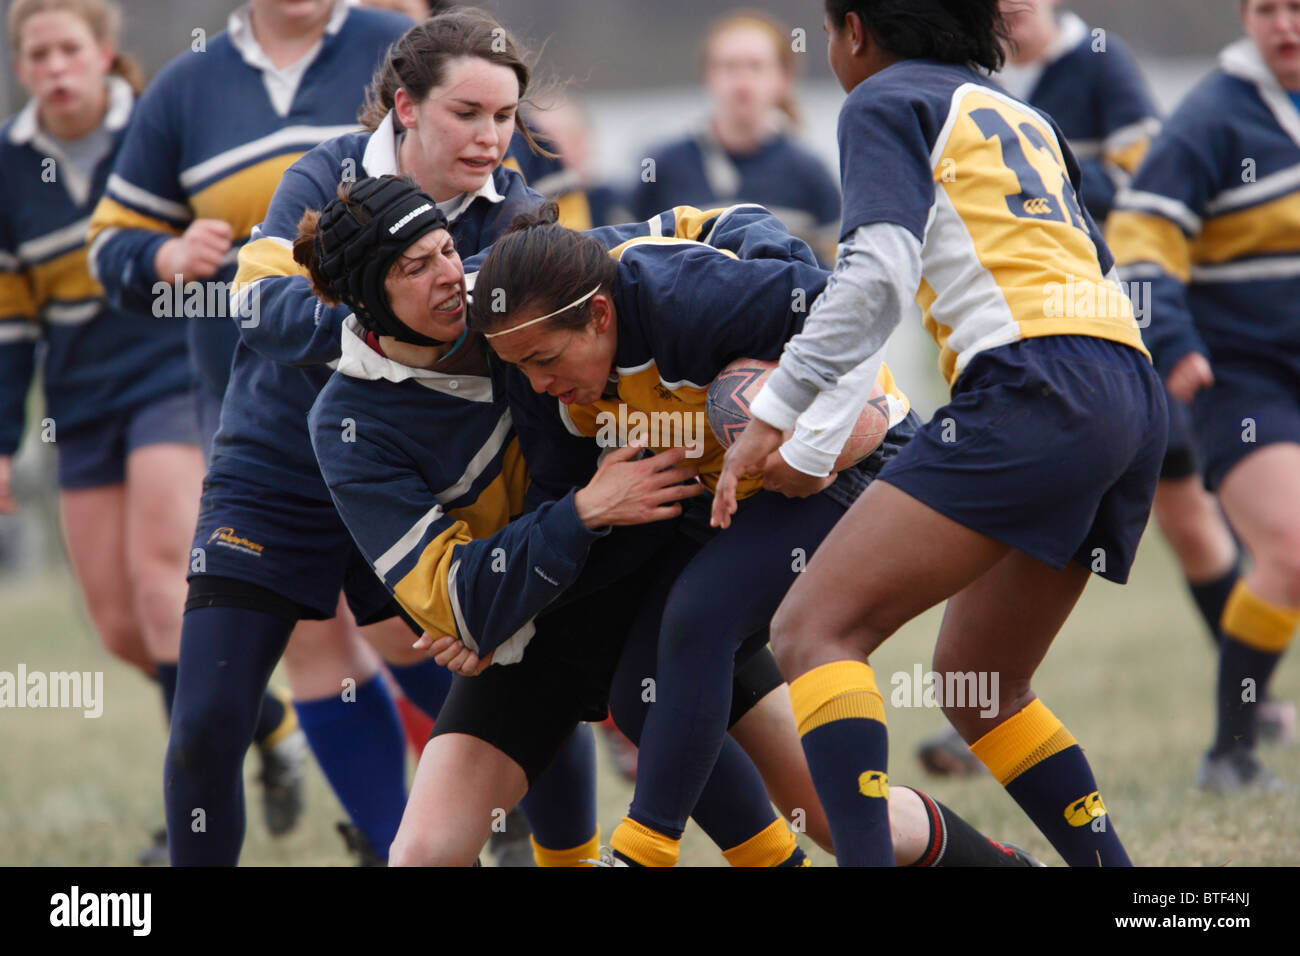 A Navy ball carrier is tackled by a Georgetown University opponent during a women's rugby match. Stock Photo